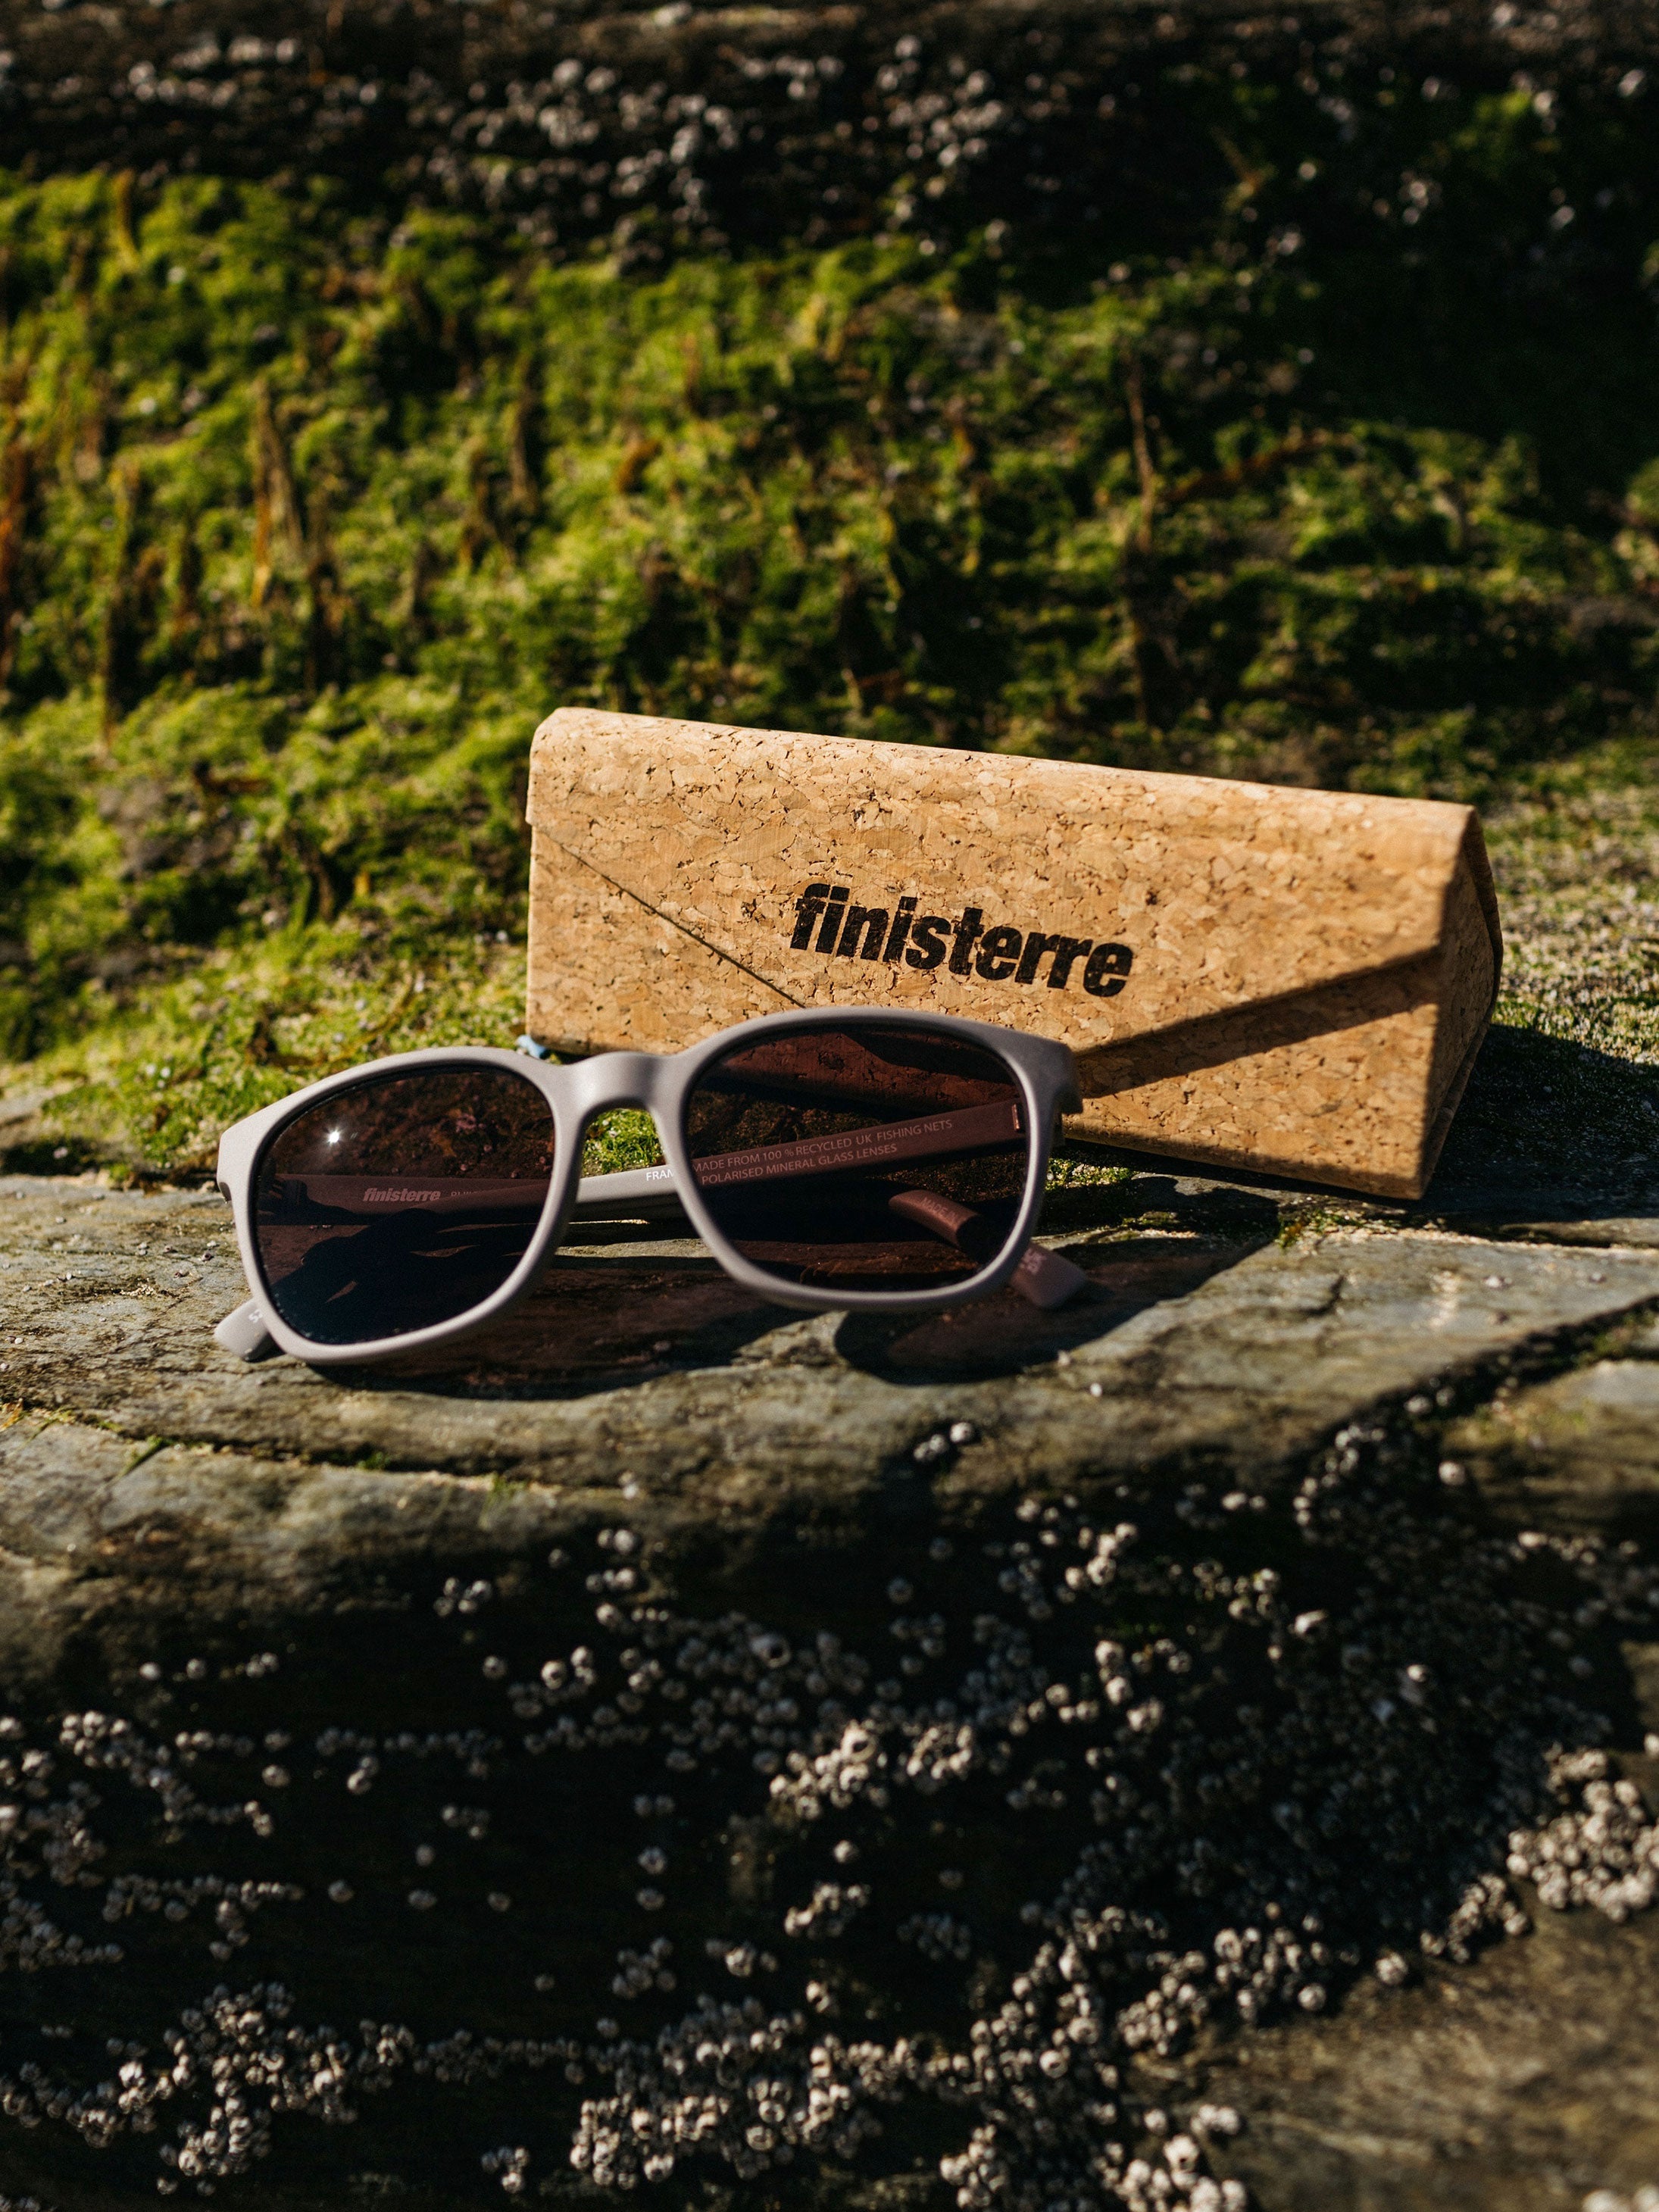 Top Sustainable Sunglasses + the Best Eco Friendly Materials for Glasses